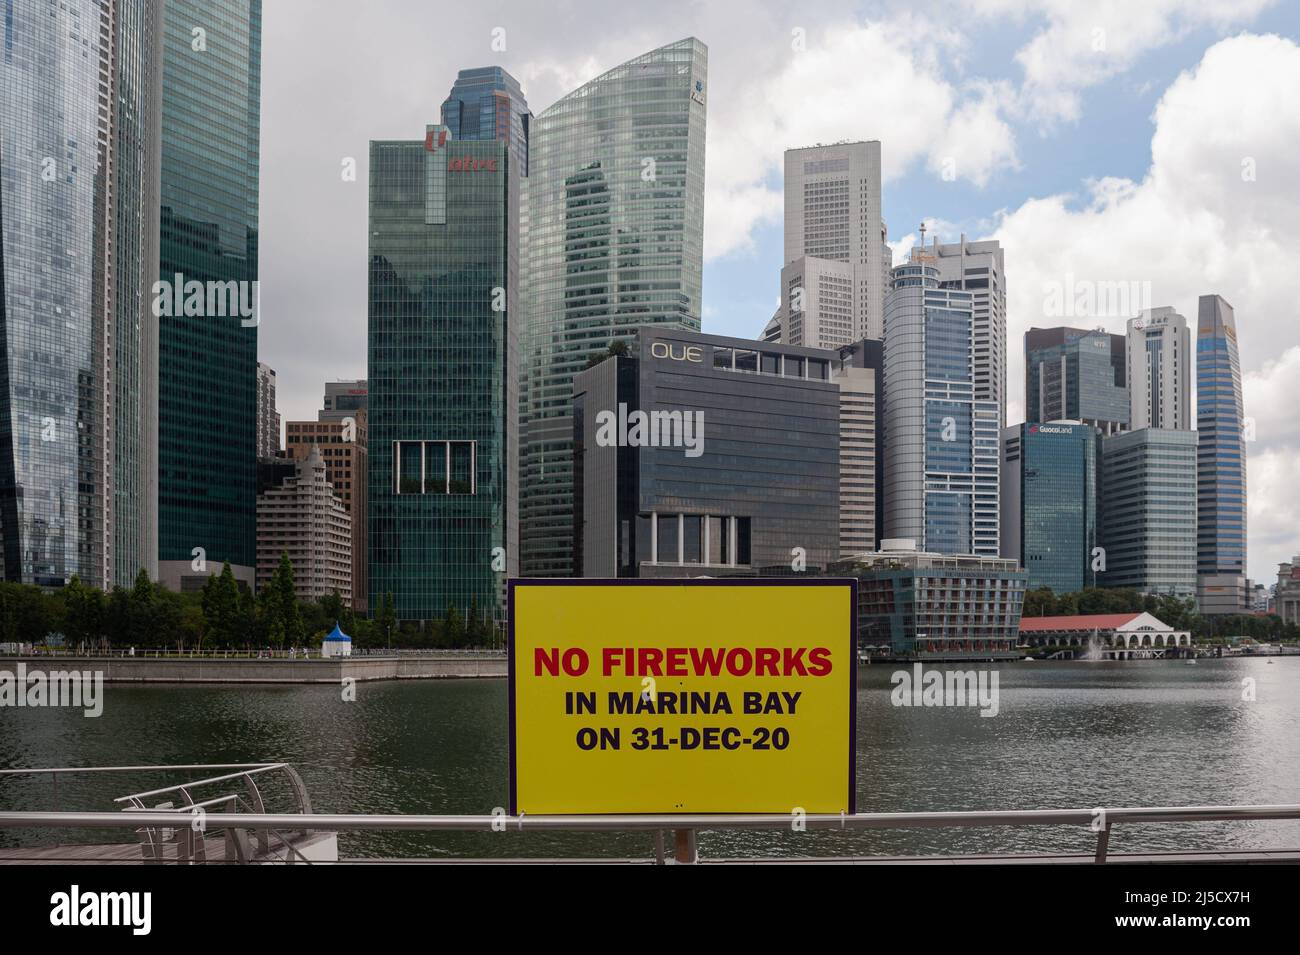 Dec. 27, 2020, Singapore, Republic of Singapore, Asia - A bright yellow sign along the waterfront in Marina Bay says there will be no New Year's Eve fireworks (No Fireworks in Marina Bay on 31-Dec-20) in Marina Bay this year. Due to the ongoing corona pandemic, this year's New Year's celebration will be held without fireworks. [automated translation] Stock Photo